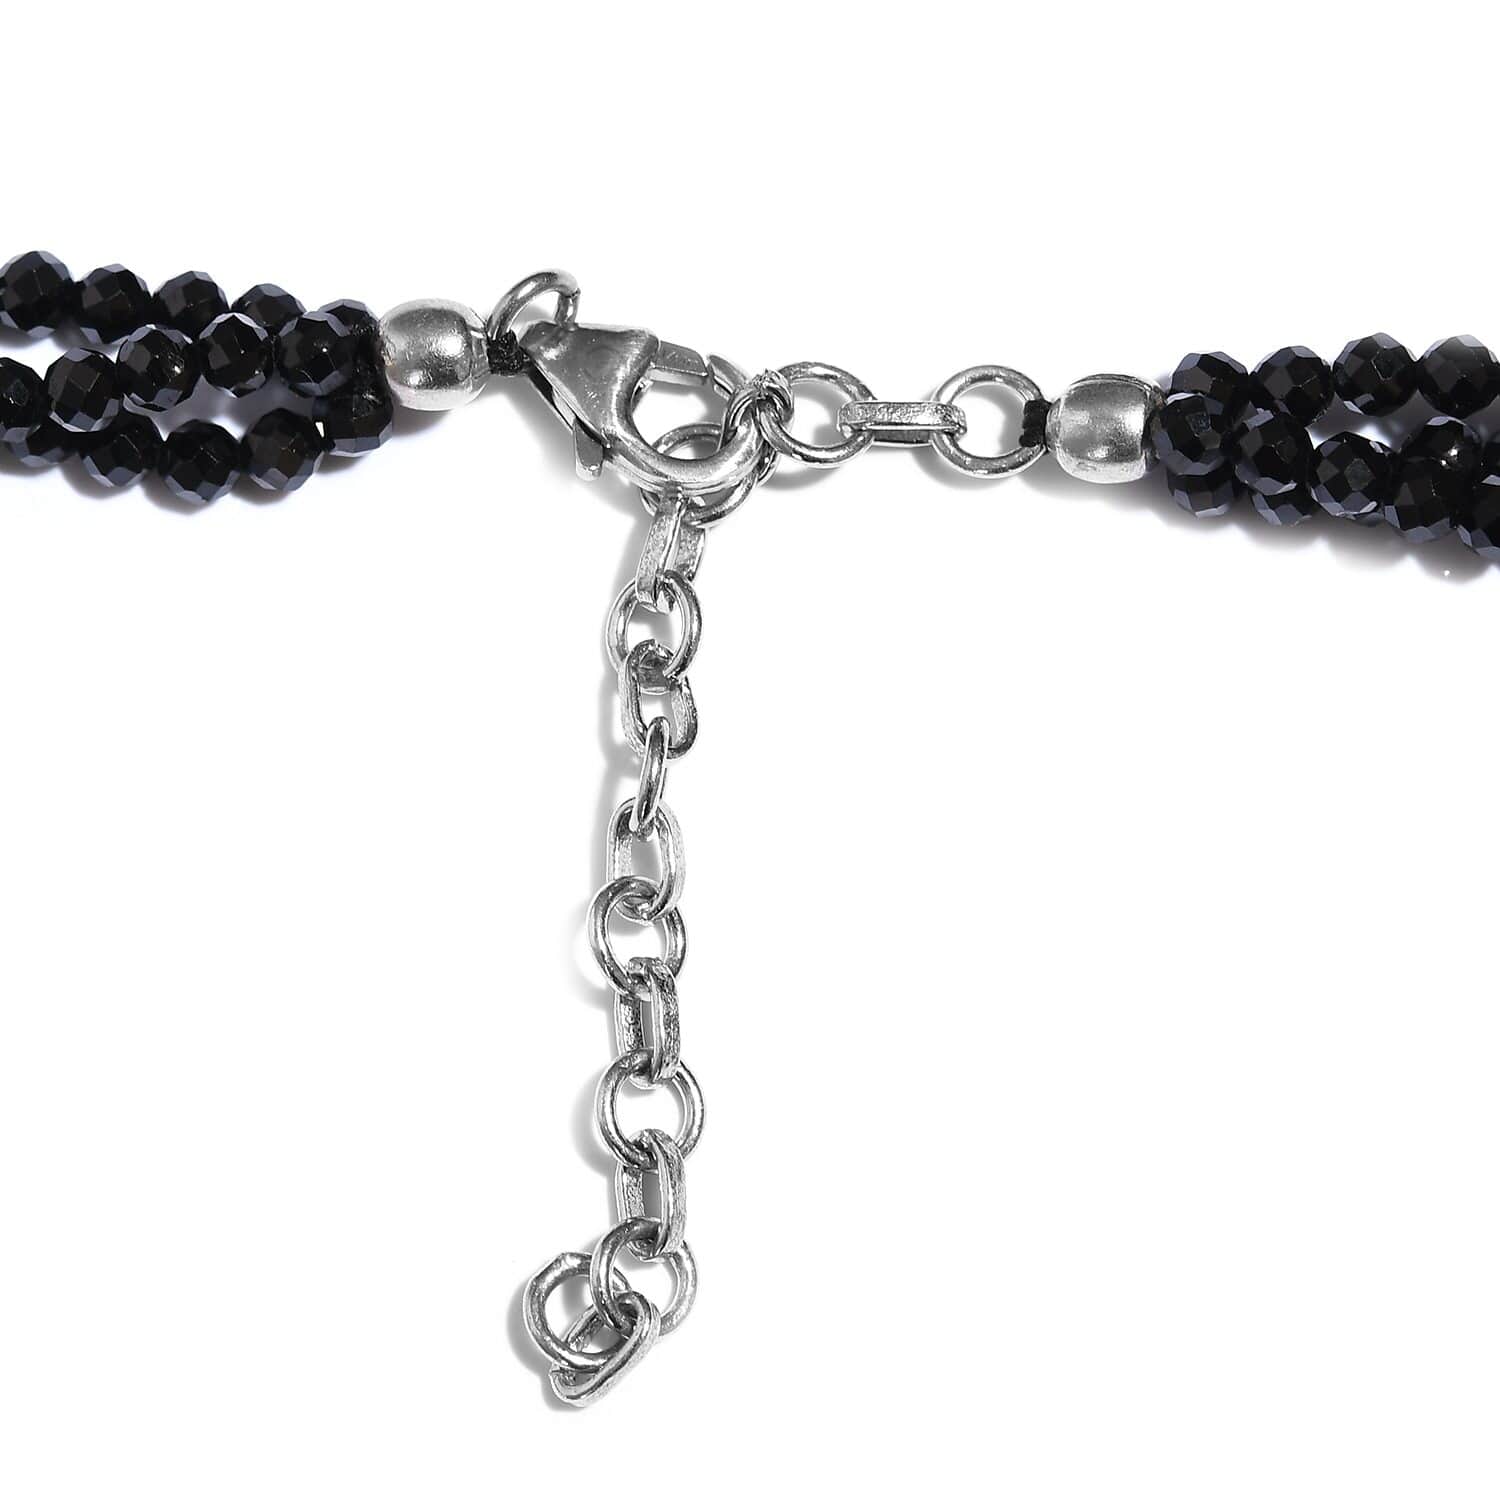 Thai Black Spinel Multi Strand Beaded Necklace 18-20 Inches in Platinum  Over Sterling Silver 81.00 ctw